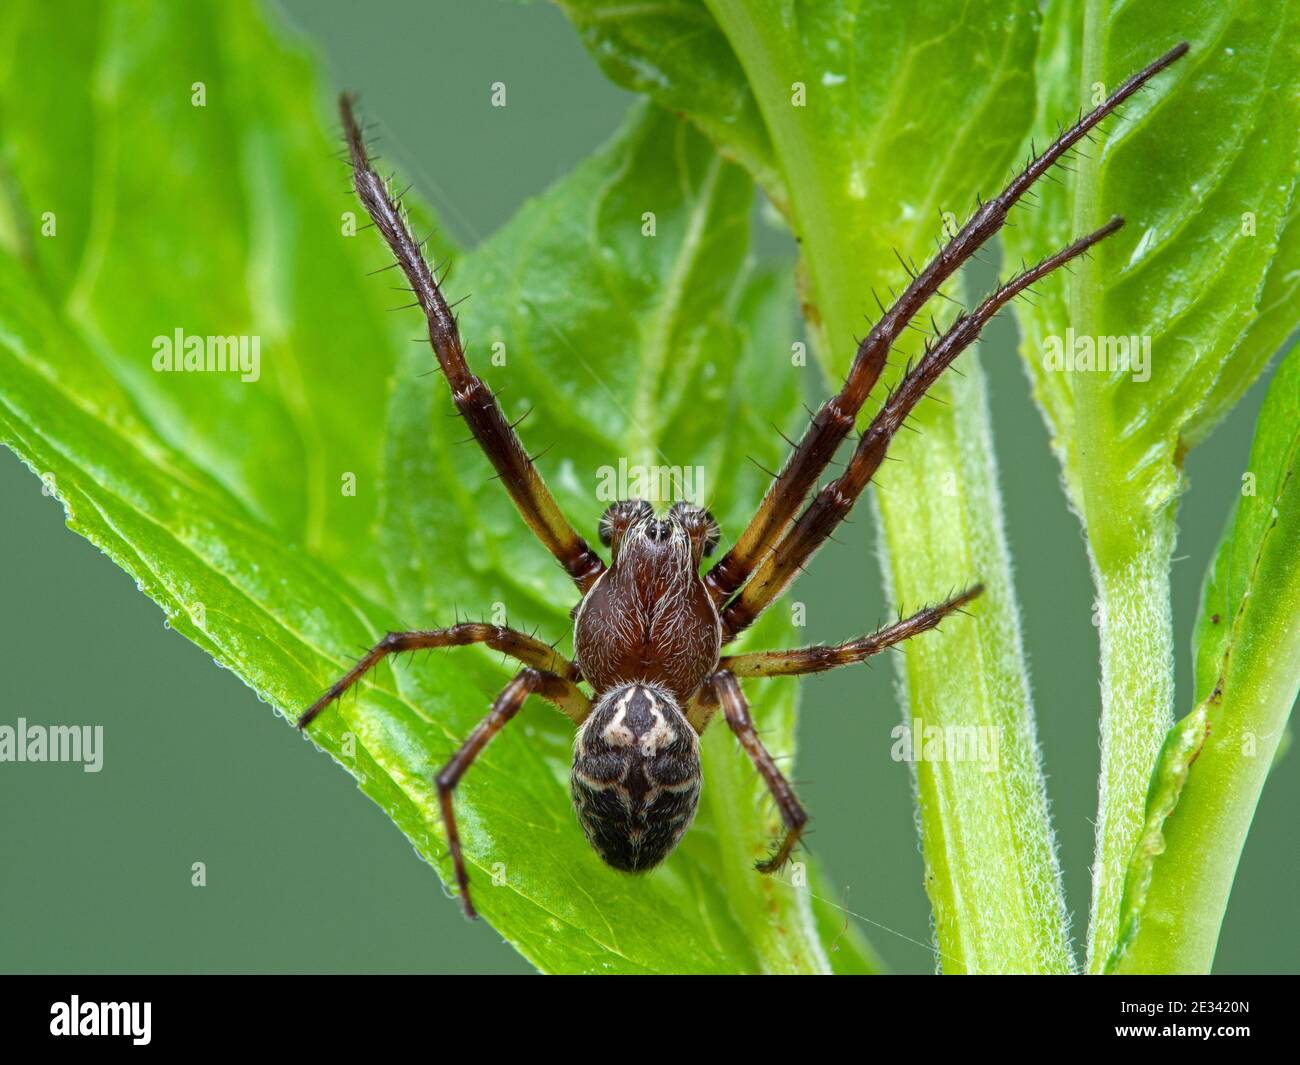 Dorsal view of a small, colourful male orbweaver spider resting on a green plant. Boundary Bay saltmarsh, Ladner, Delta, British Columbia, Canada Stock Photo